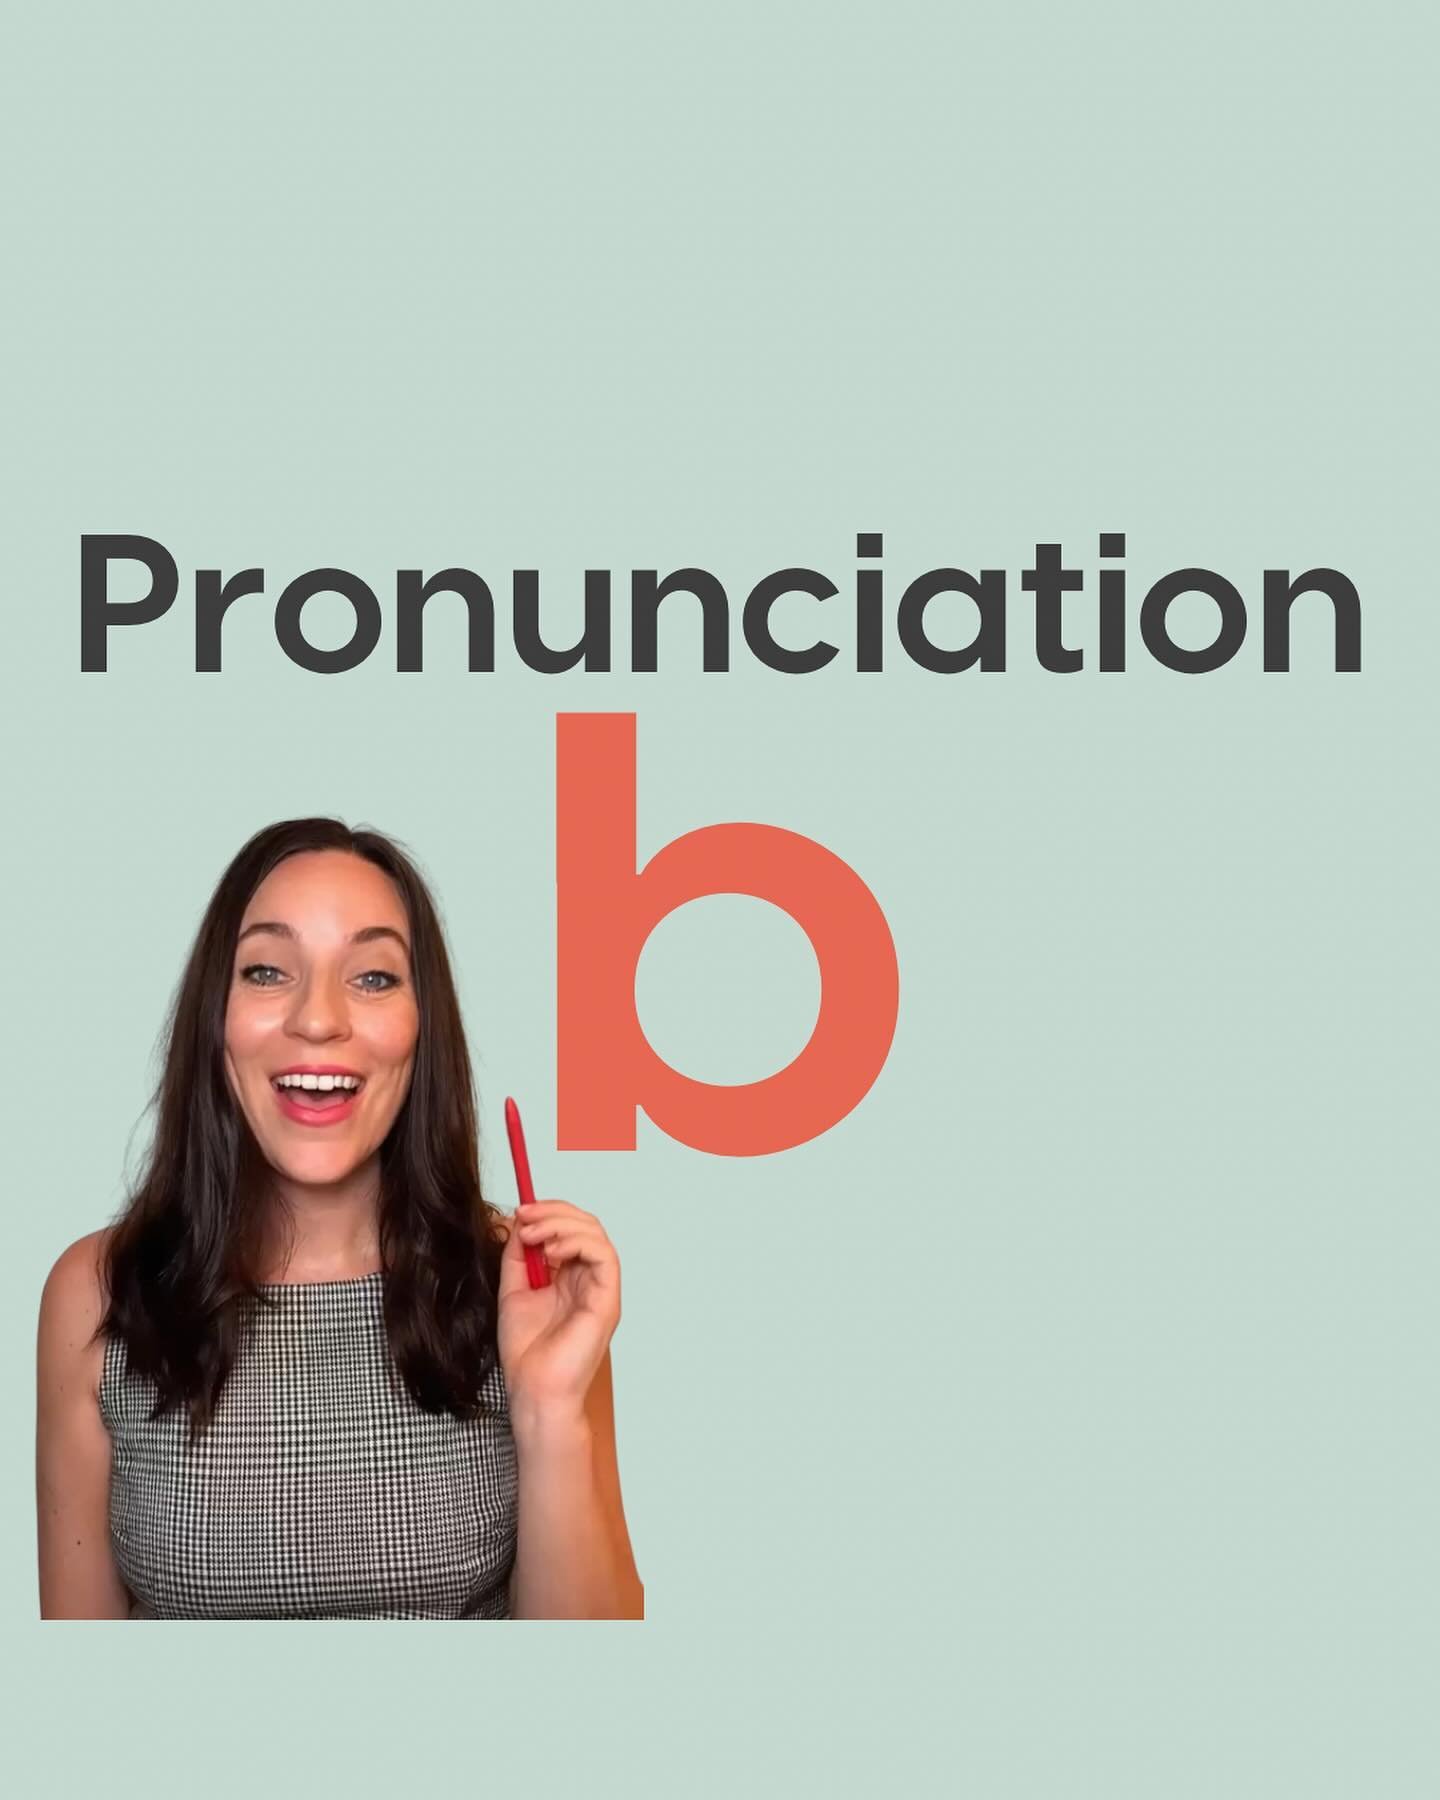 DM me to learn how to subscribe to my full Pronunciation Master Class&mdash; with 40 longer lessons and 200 videos that break down each sound of American English pronunciation in detail ✅✅✅

#pronunciation&nbsp;#englishpronunciation&nbsp;#speakenglis